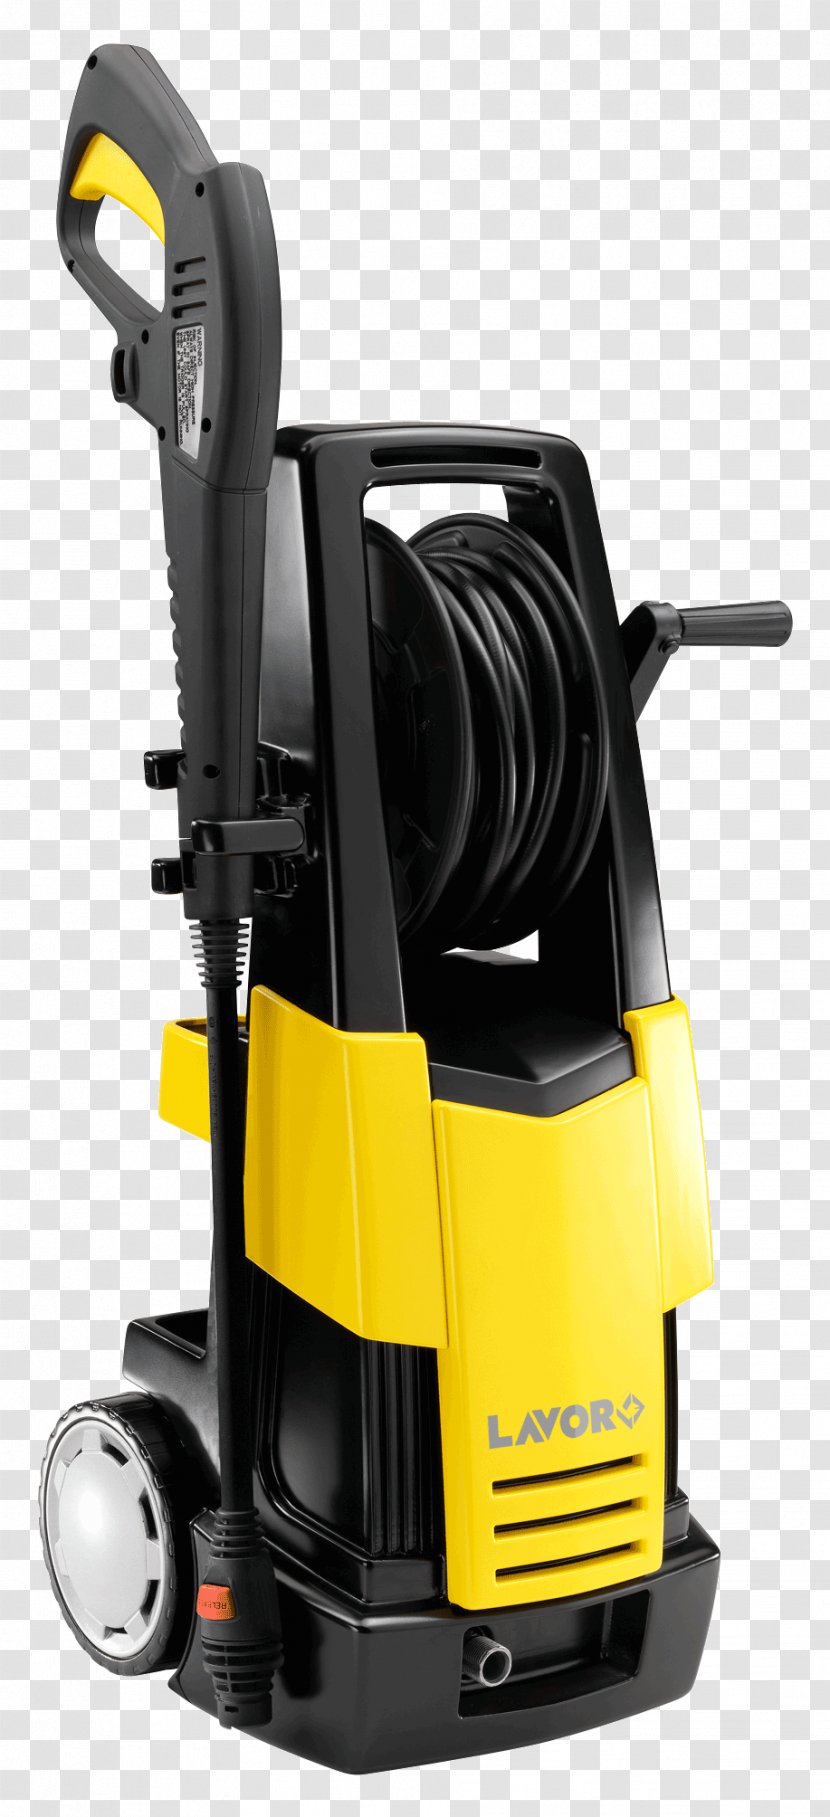 Pressure Washers Amazon.com Vapor Steam Cleaner Cleaning - Detergent - Wave Transparent PNG